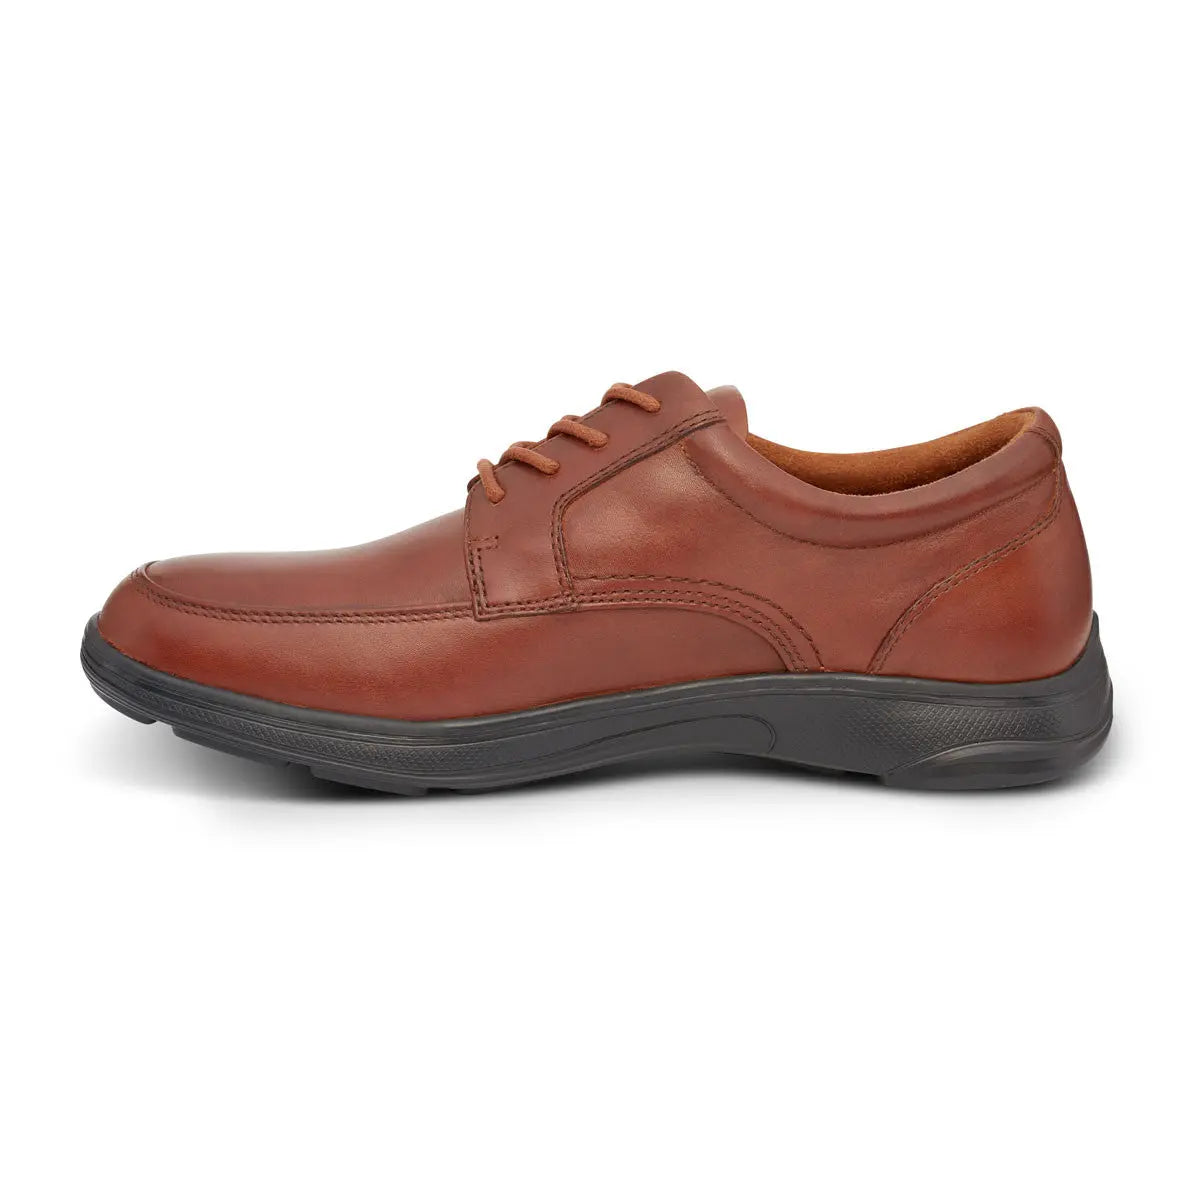 Anodyne Men's No.12 Oxford - BURNISHED BROWN with lace closure